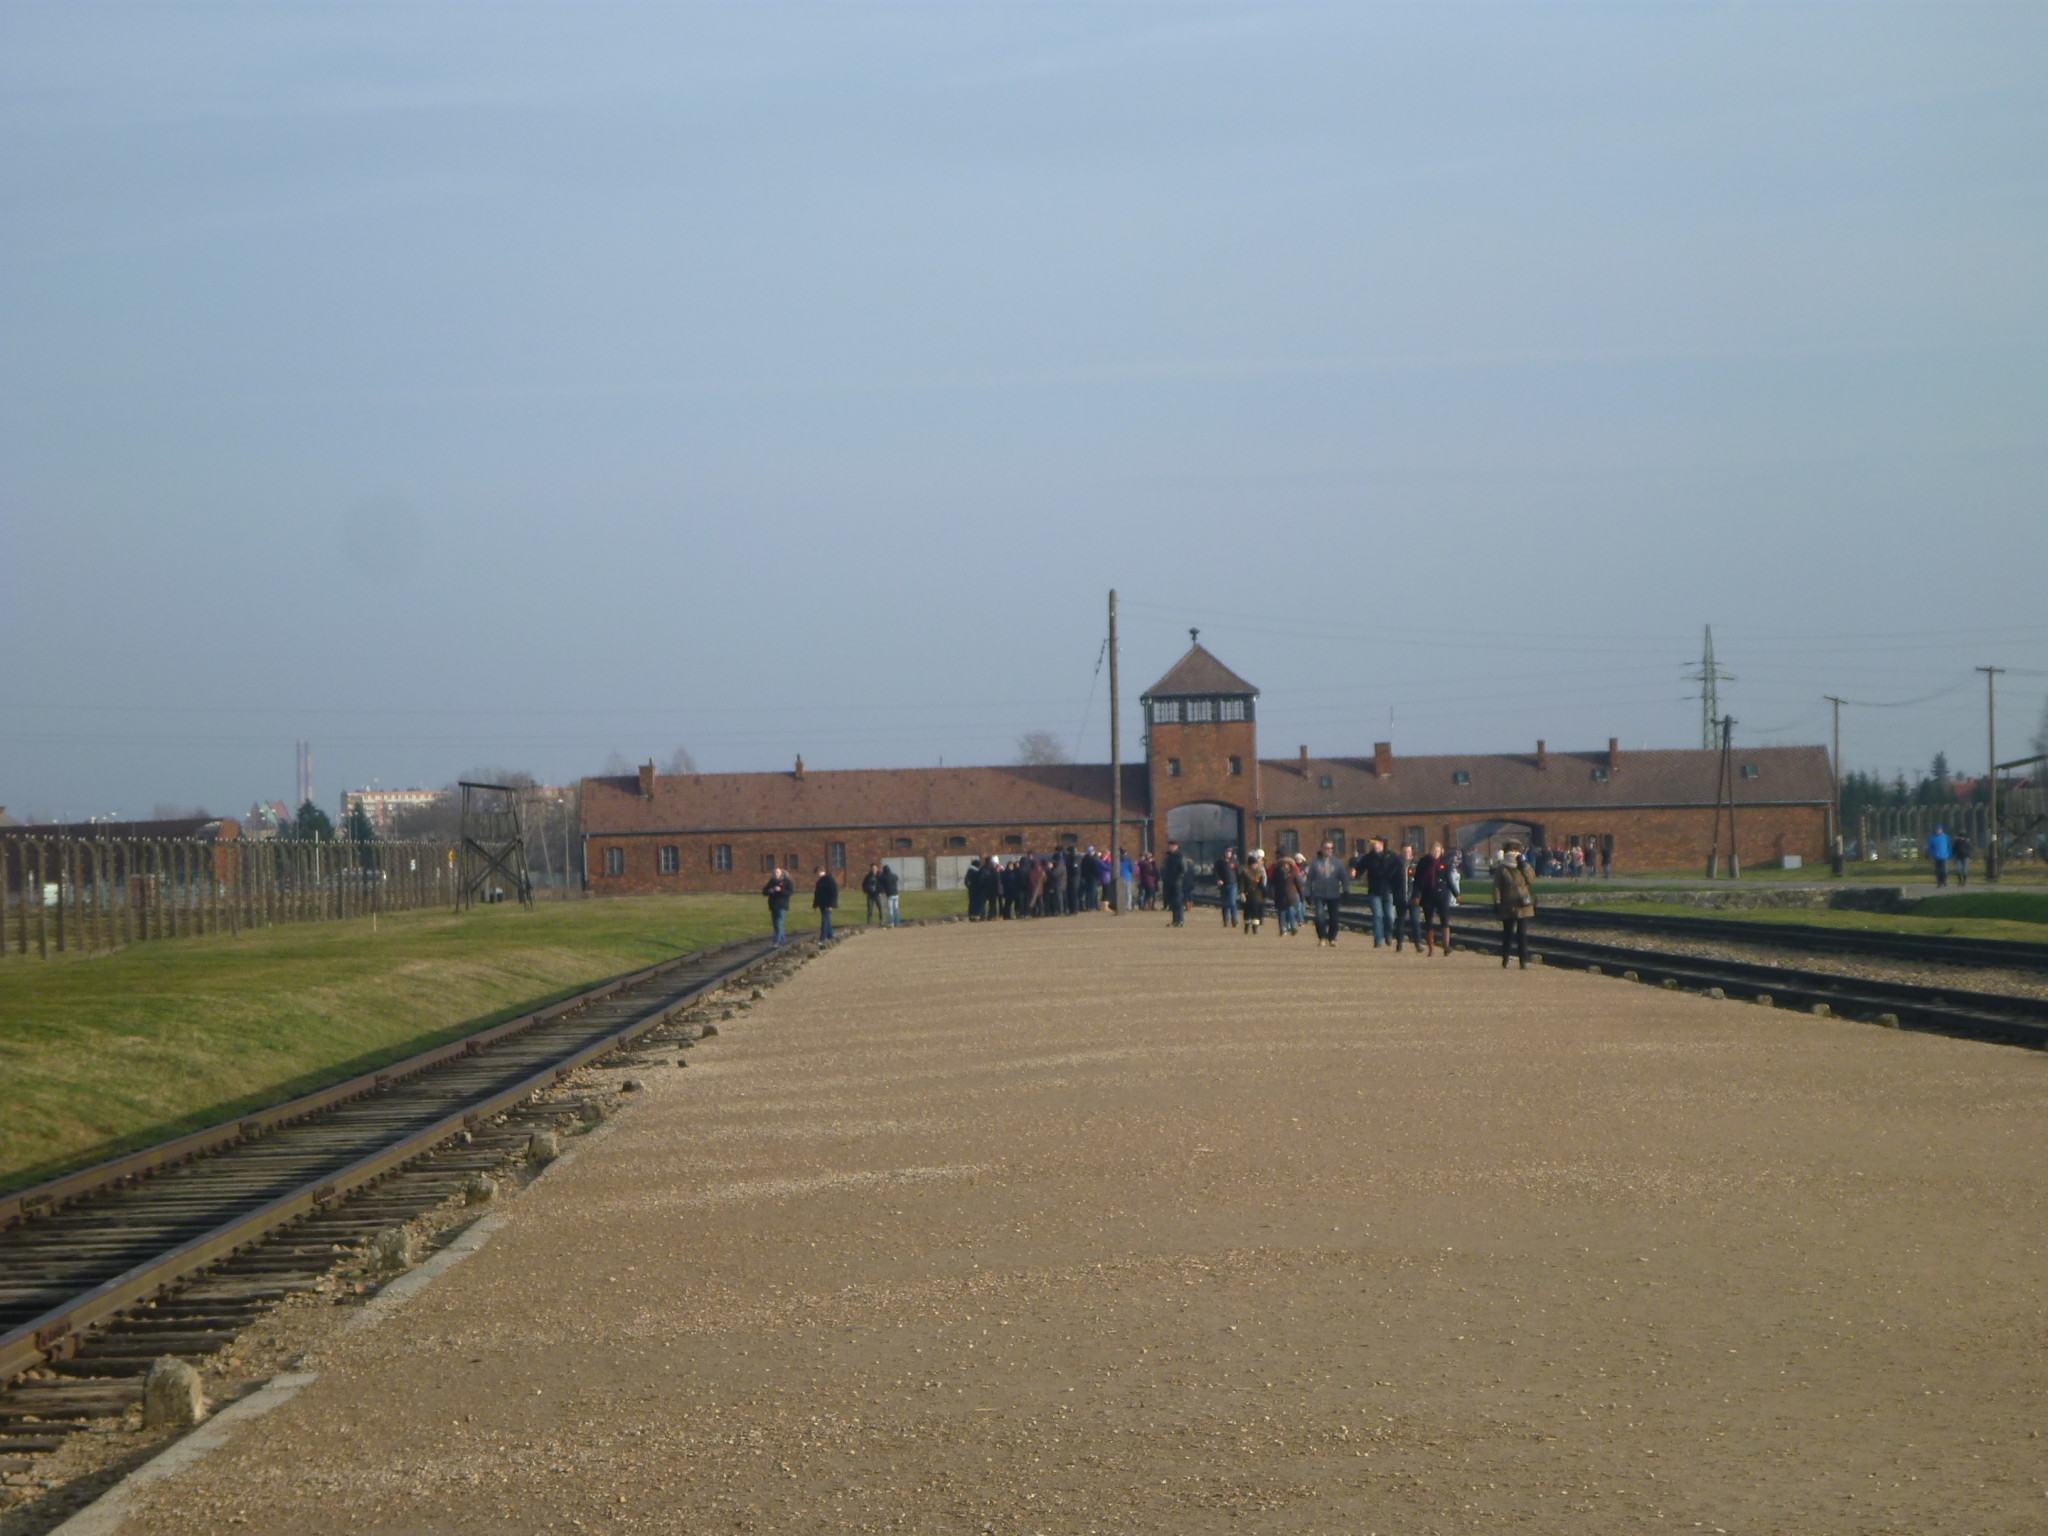 Day Tour of Nazi Concentration Camps with Mosquito Hostel in Krakow, Poland: Part 2 - Touring Auschwitz II, Birkenau Camp